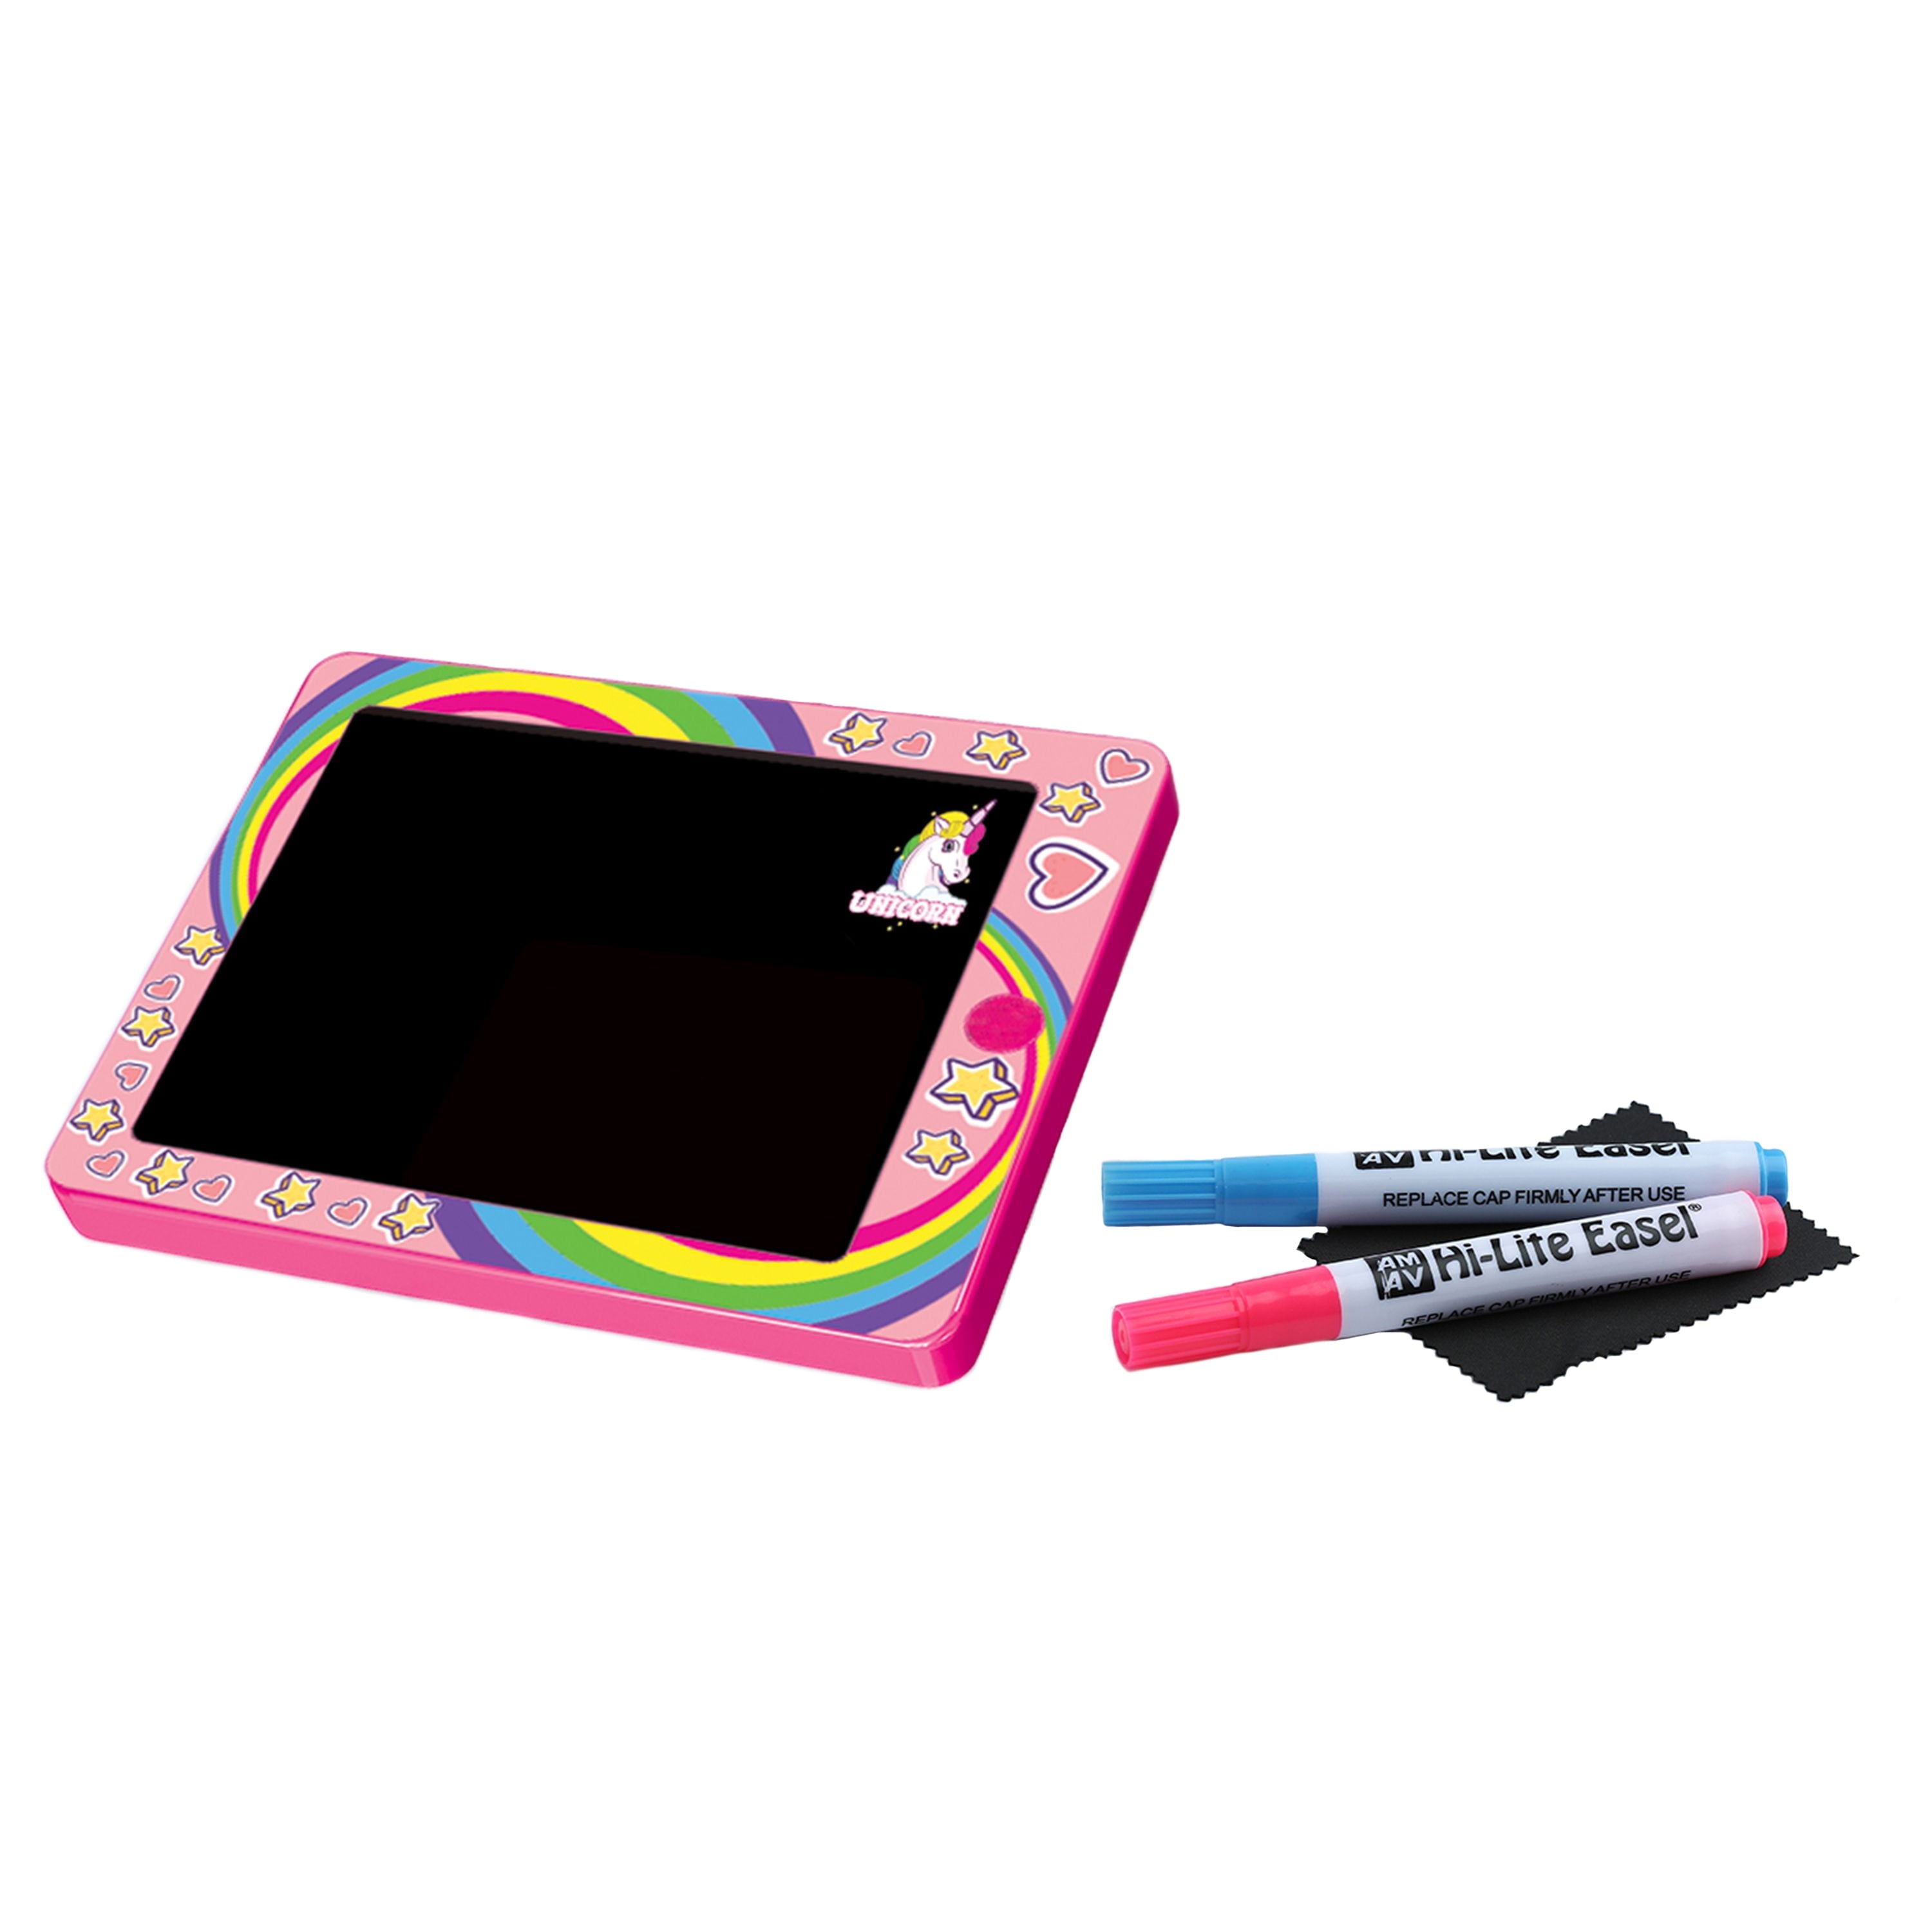 Amav Unicorn Glow Pad - Portable Unicorn Tablet-Sized Drawing Board with 2 Special Markers and Blinking Colored Lights!